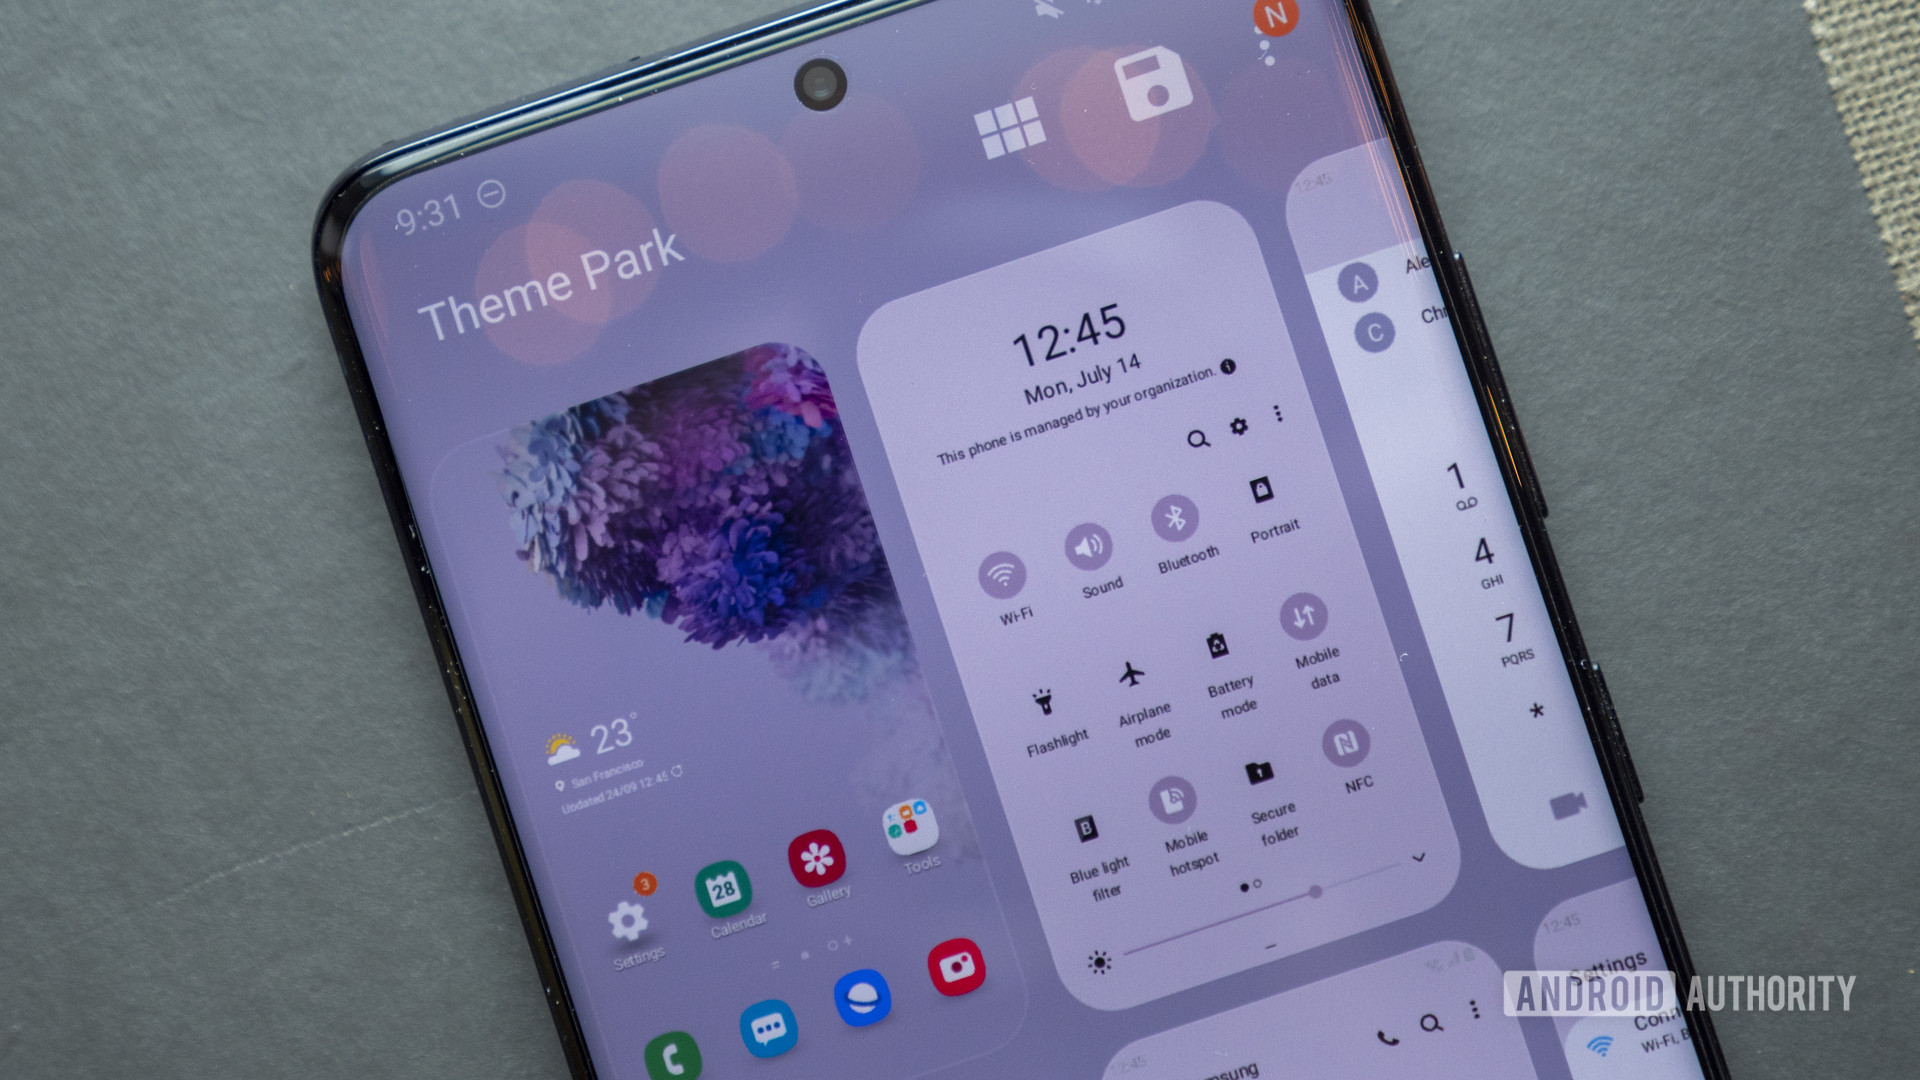 How to use Samsung Theme Park - Android Authority